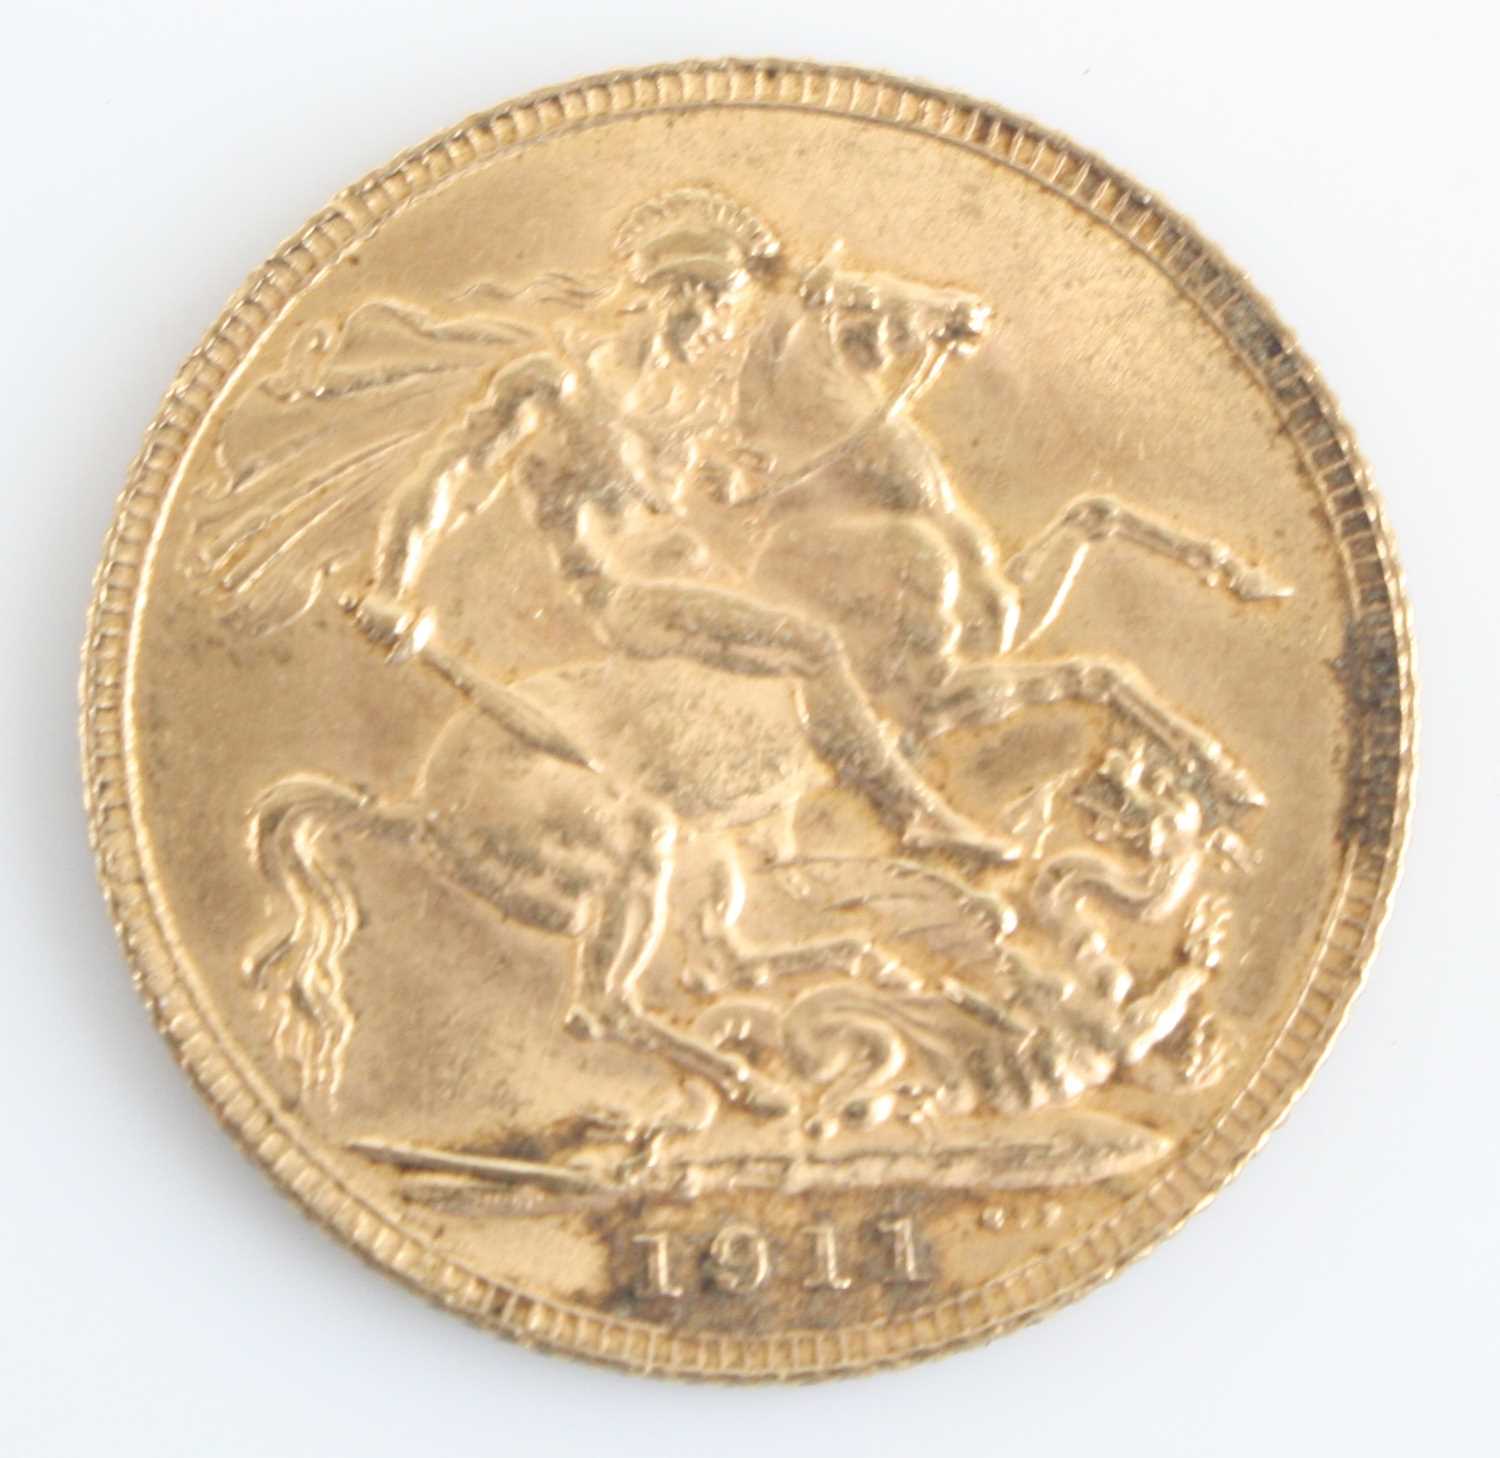 Great Britain, 1911 gold full sovereign, George V, rev: St George and Dragon above date. (1) - Image 2 of 2